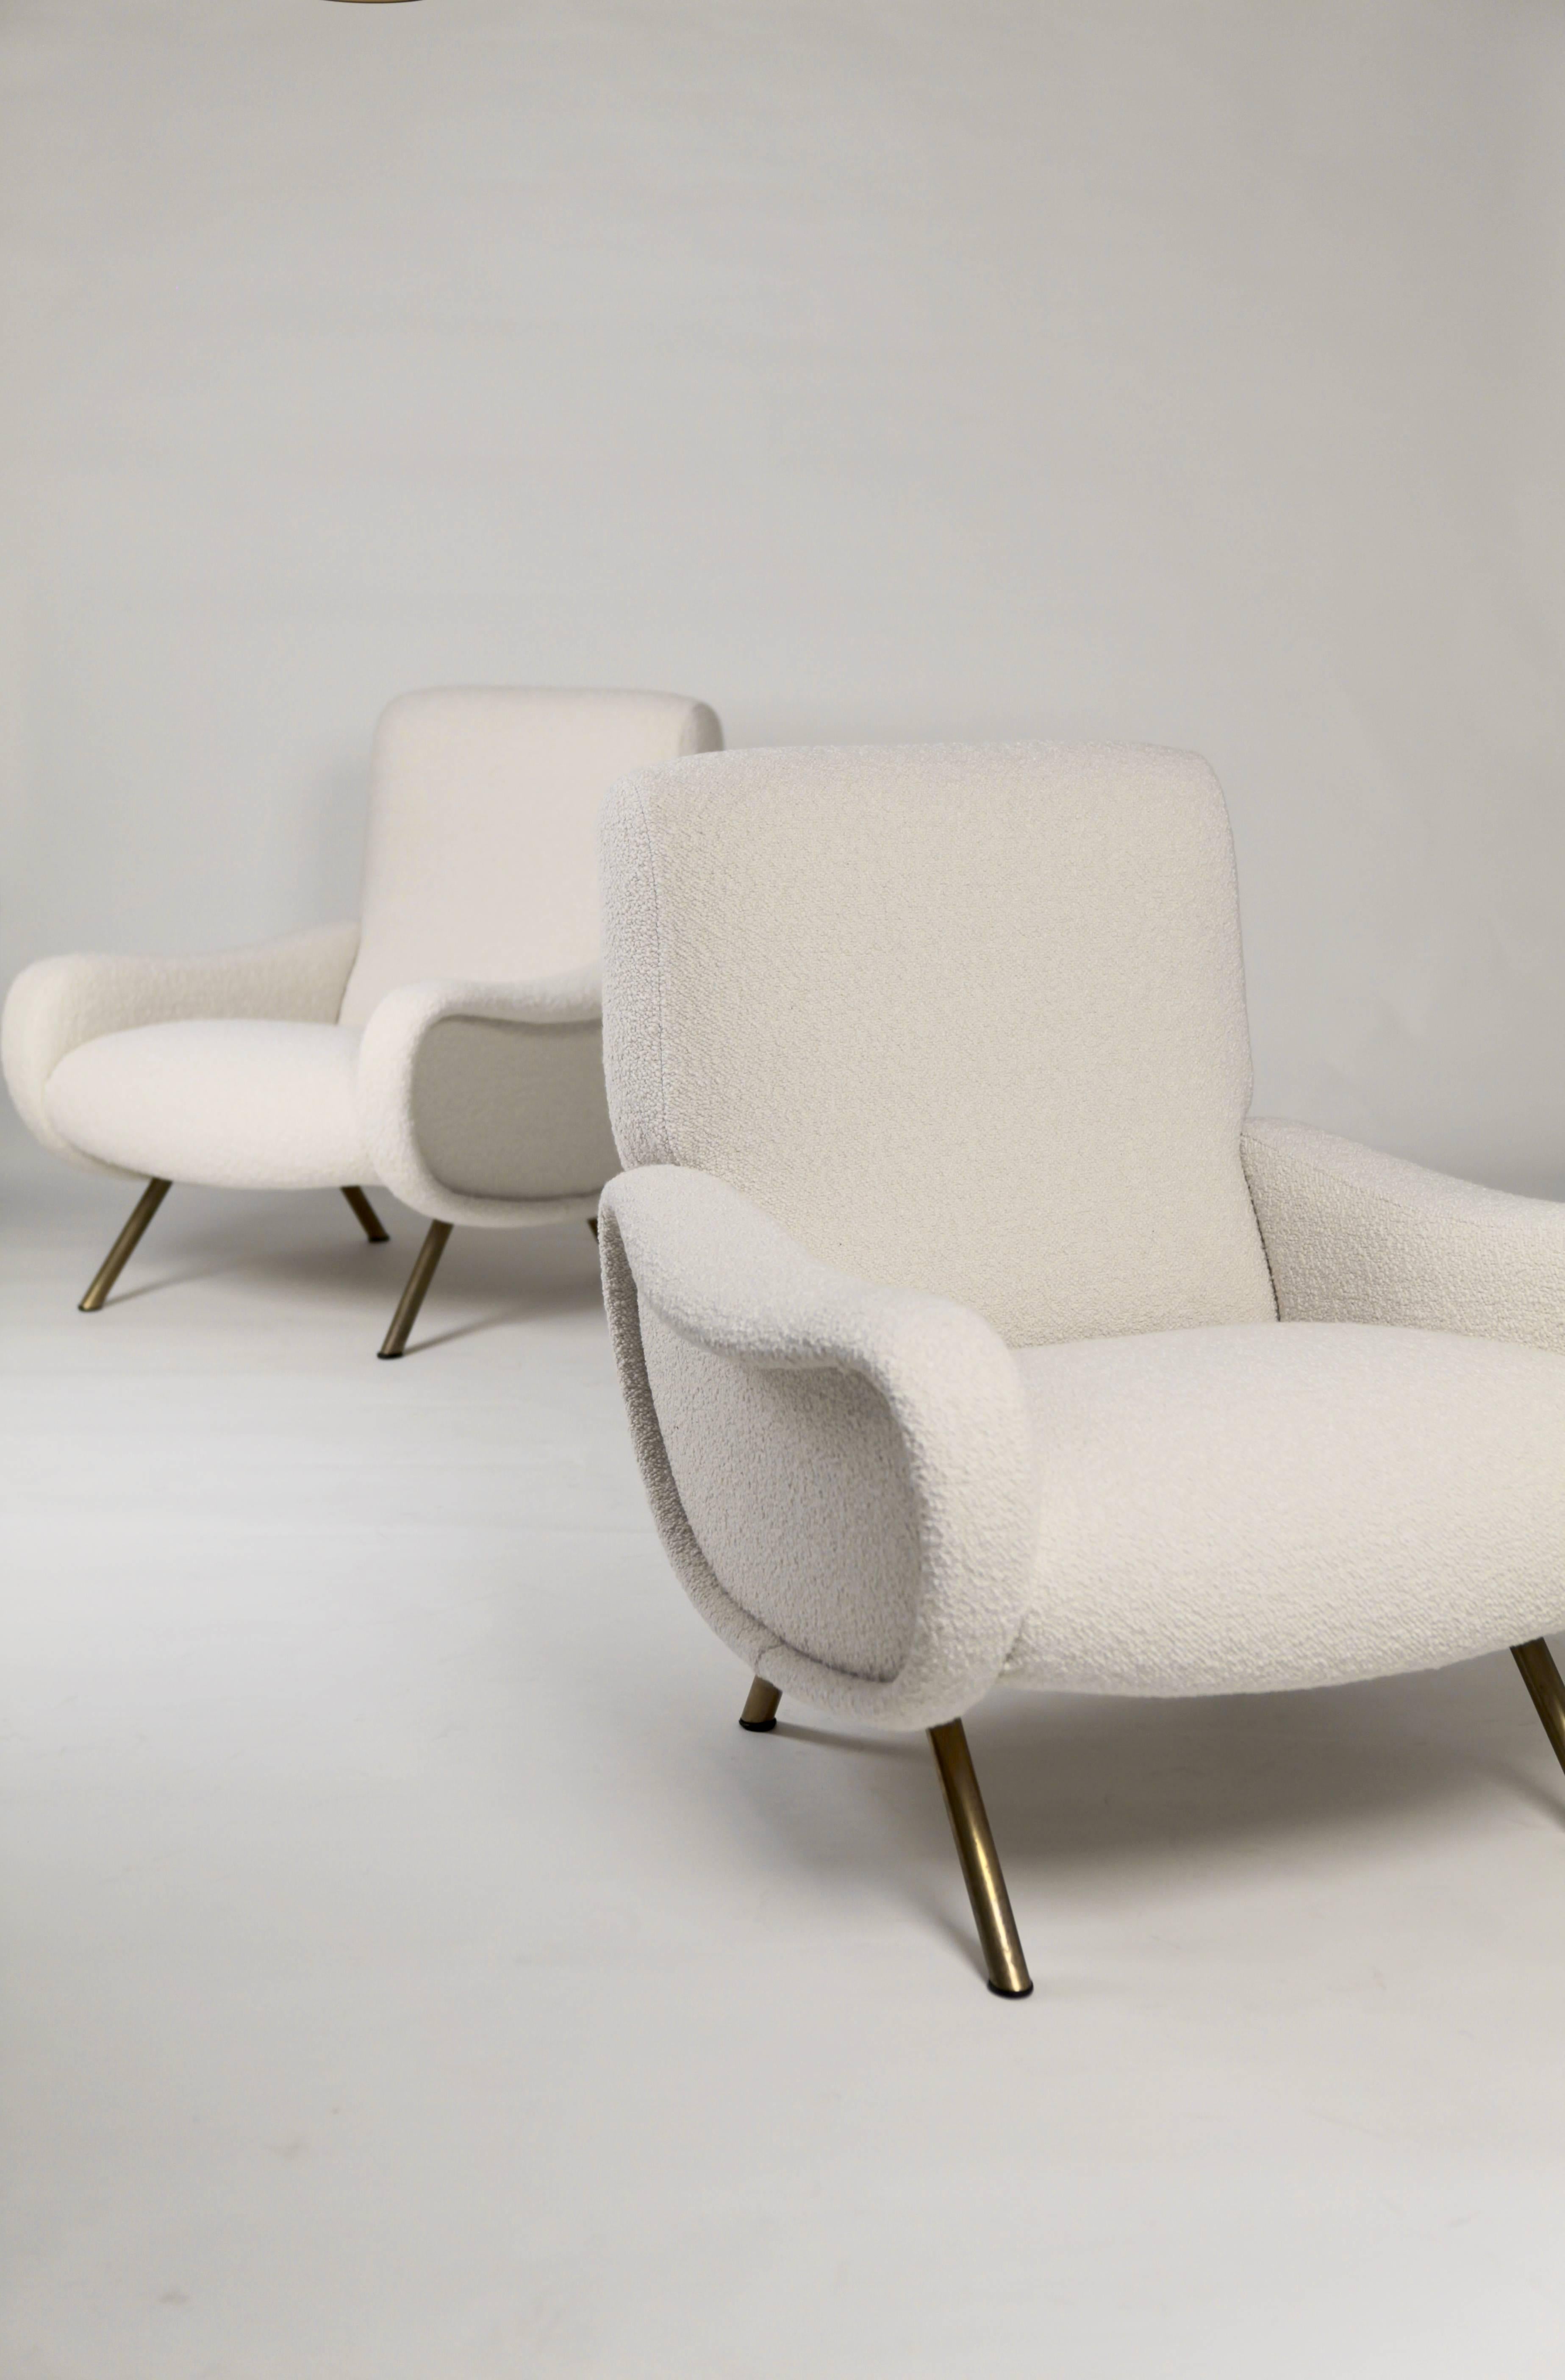 Excellent pair of 'Lady' armchairs by Marco Zanuso,
very early 'Arflex' edition with wooden frame, Italy, circa 1951
New upholstery, original rubber shoes.